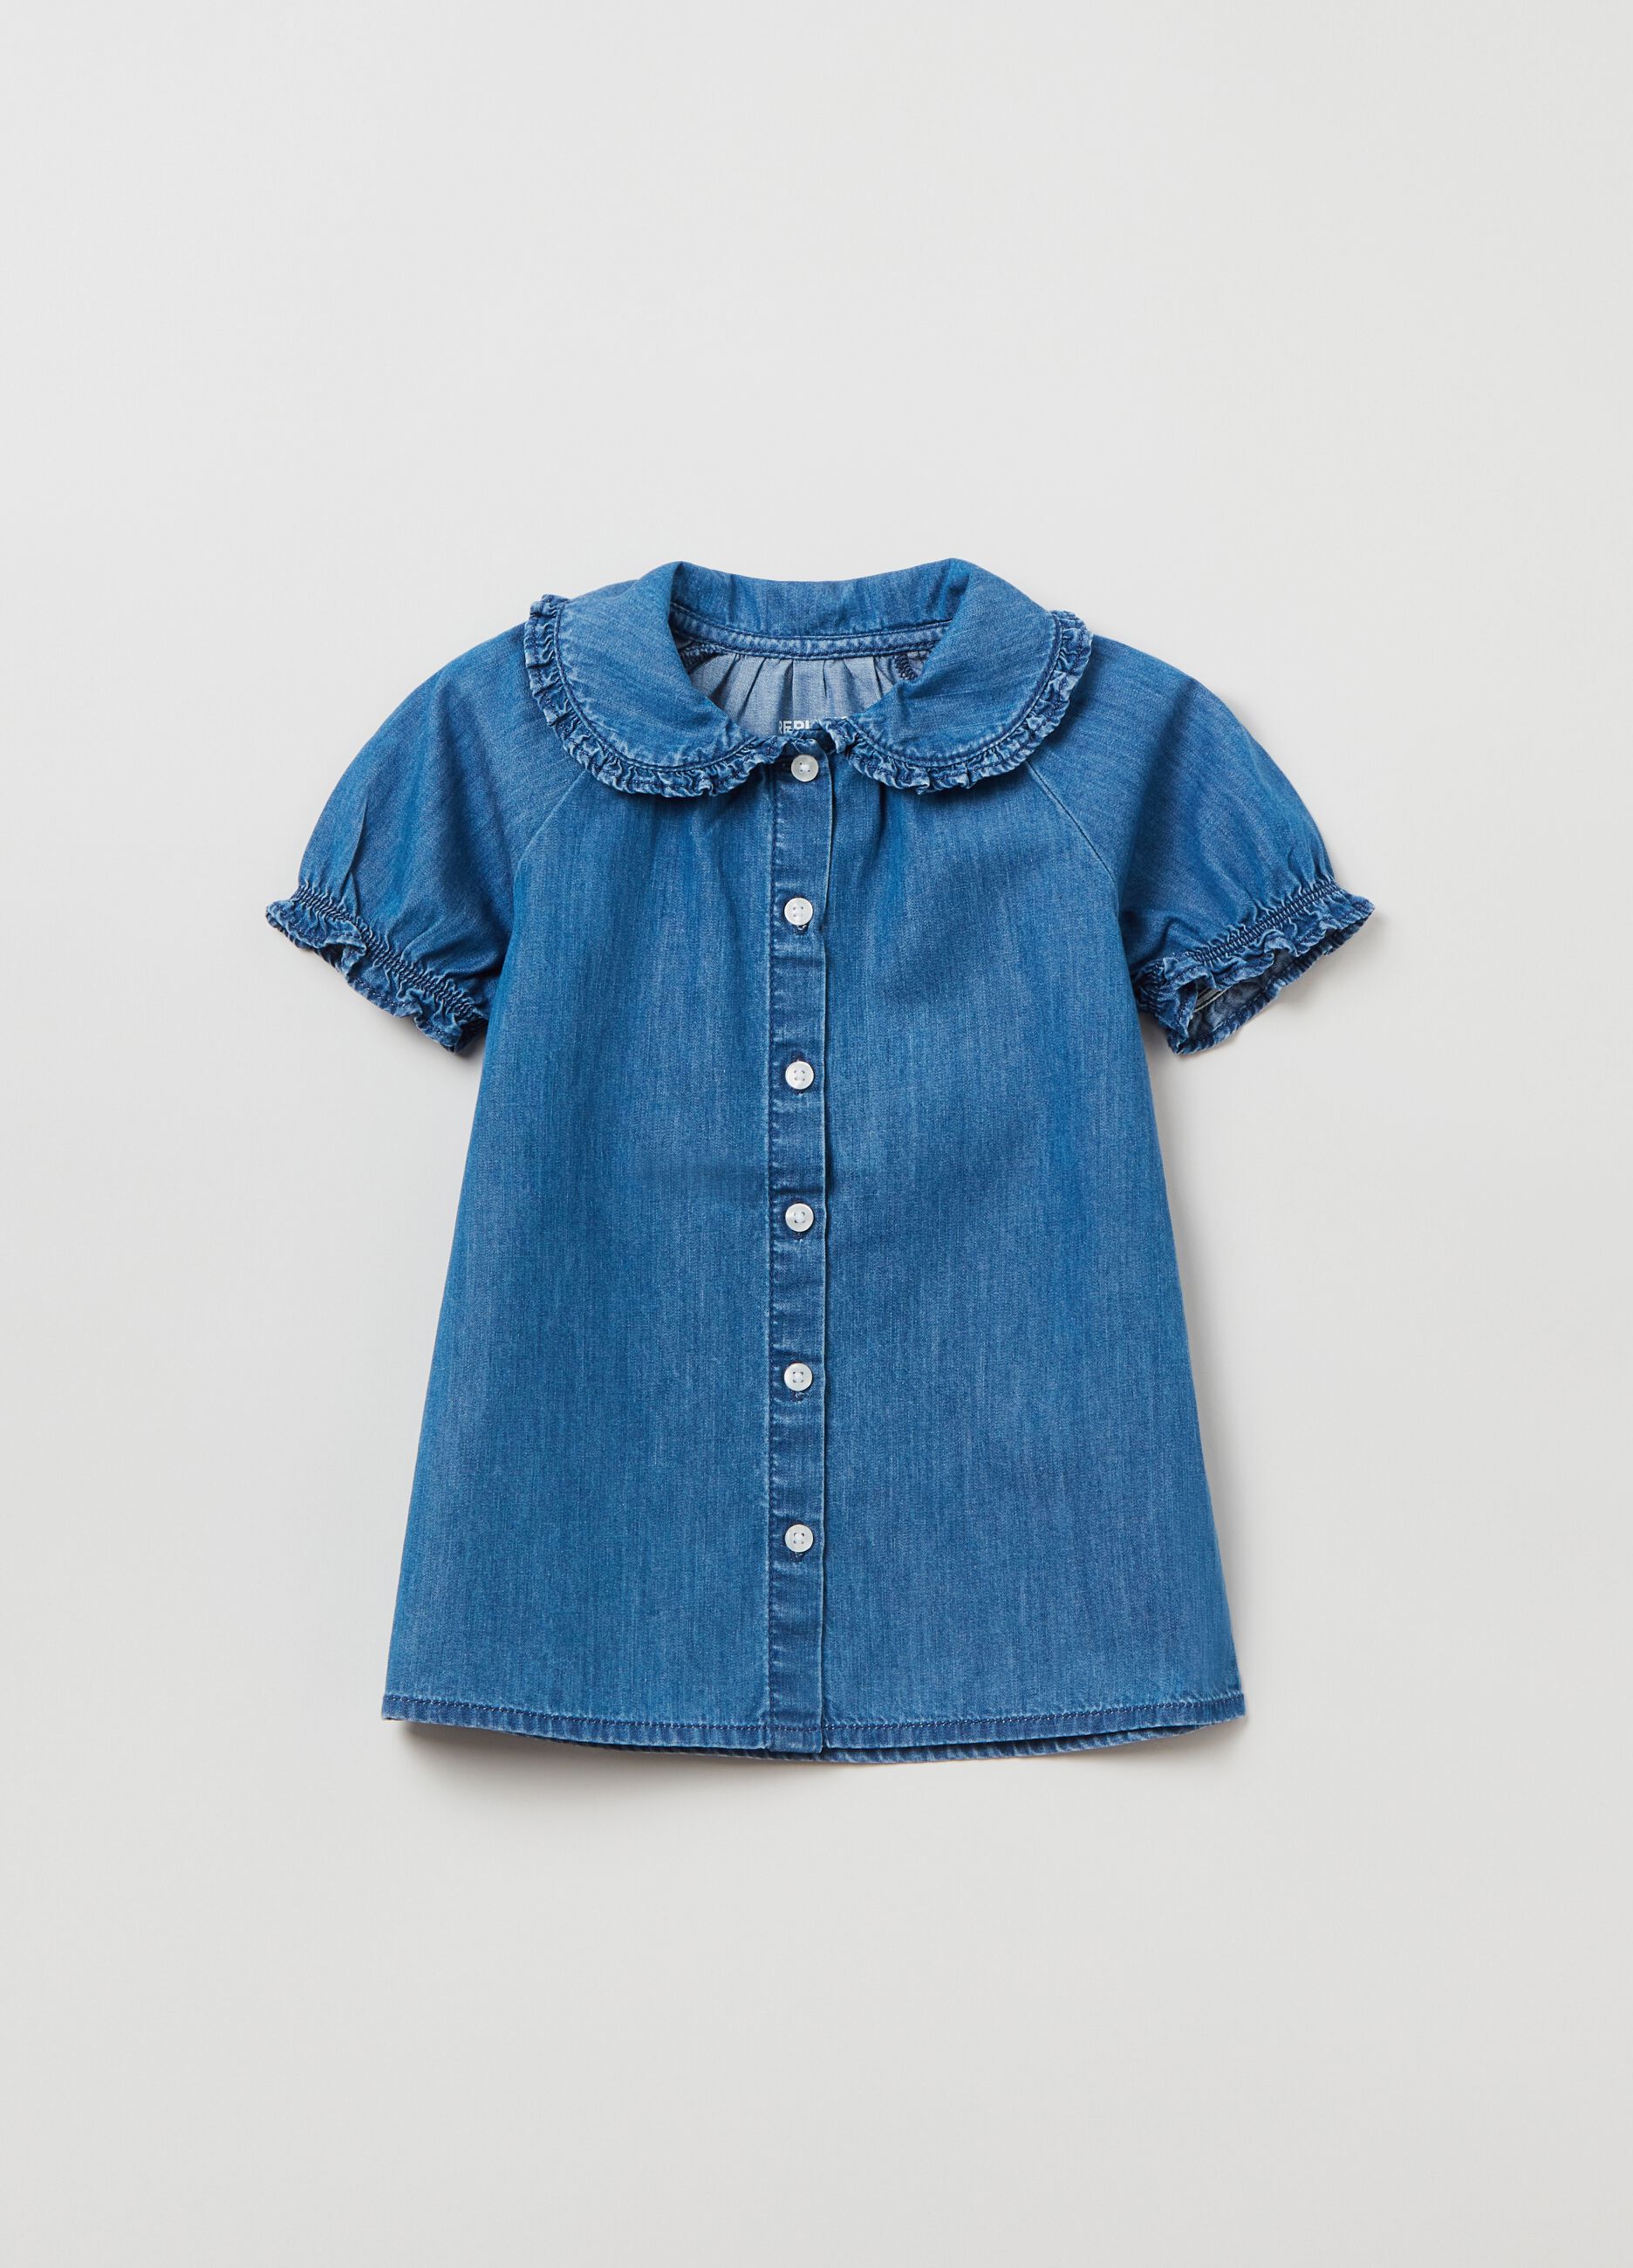 Denim shirt with puff sleeves